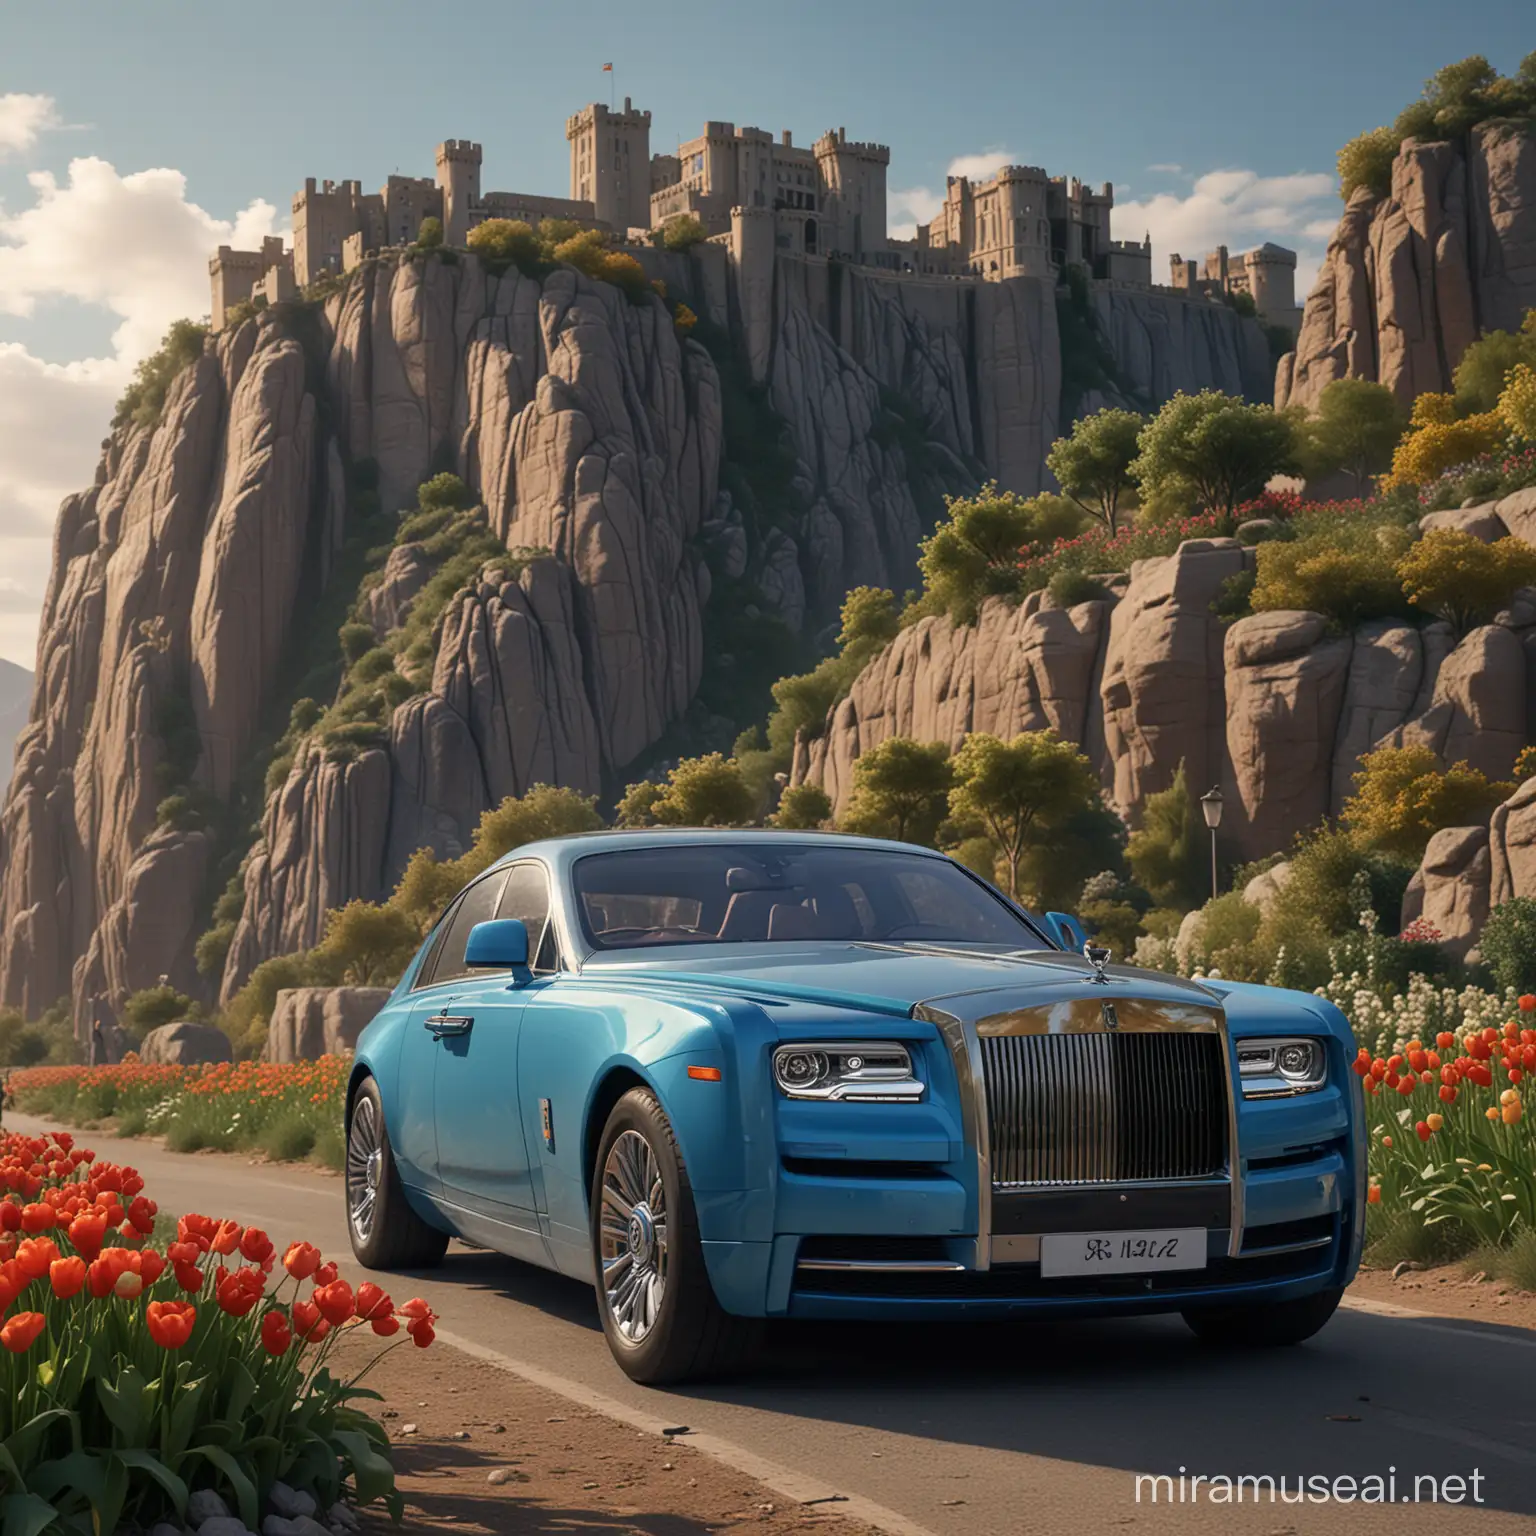 ultra detailed, 8k, moutain area,real size body supergirl longleg with superman bluesuit  standing on right of 2020 type real scale tall height huge  Rolls Royce  Extended superlong lux Silver Phantom , parked on a sharp higher cliff euro ancient castle  , Blooming with height Papaver flower and tulips，green leaves,with a cheetah crouching beside her, watching Riyadh set off dazzling fireworks，autumn early night , clearsky, cloudy,